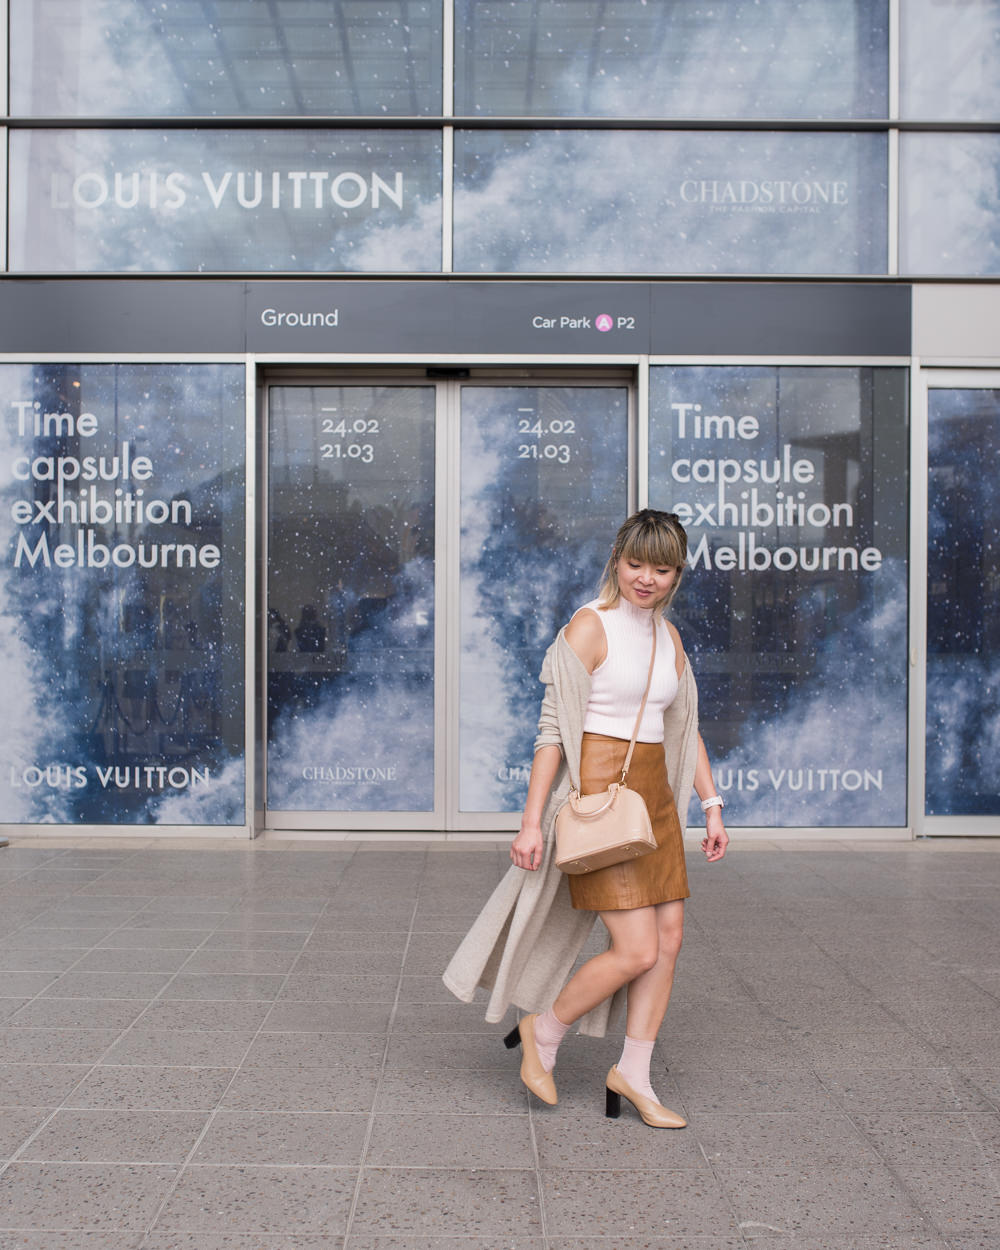 FASHION: Chadstone, 'The Fashion Capital' Hosts Louis Vuitton's Time  Capsule Exhibition – THE JOURNAL MAG